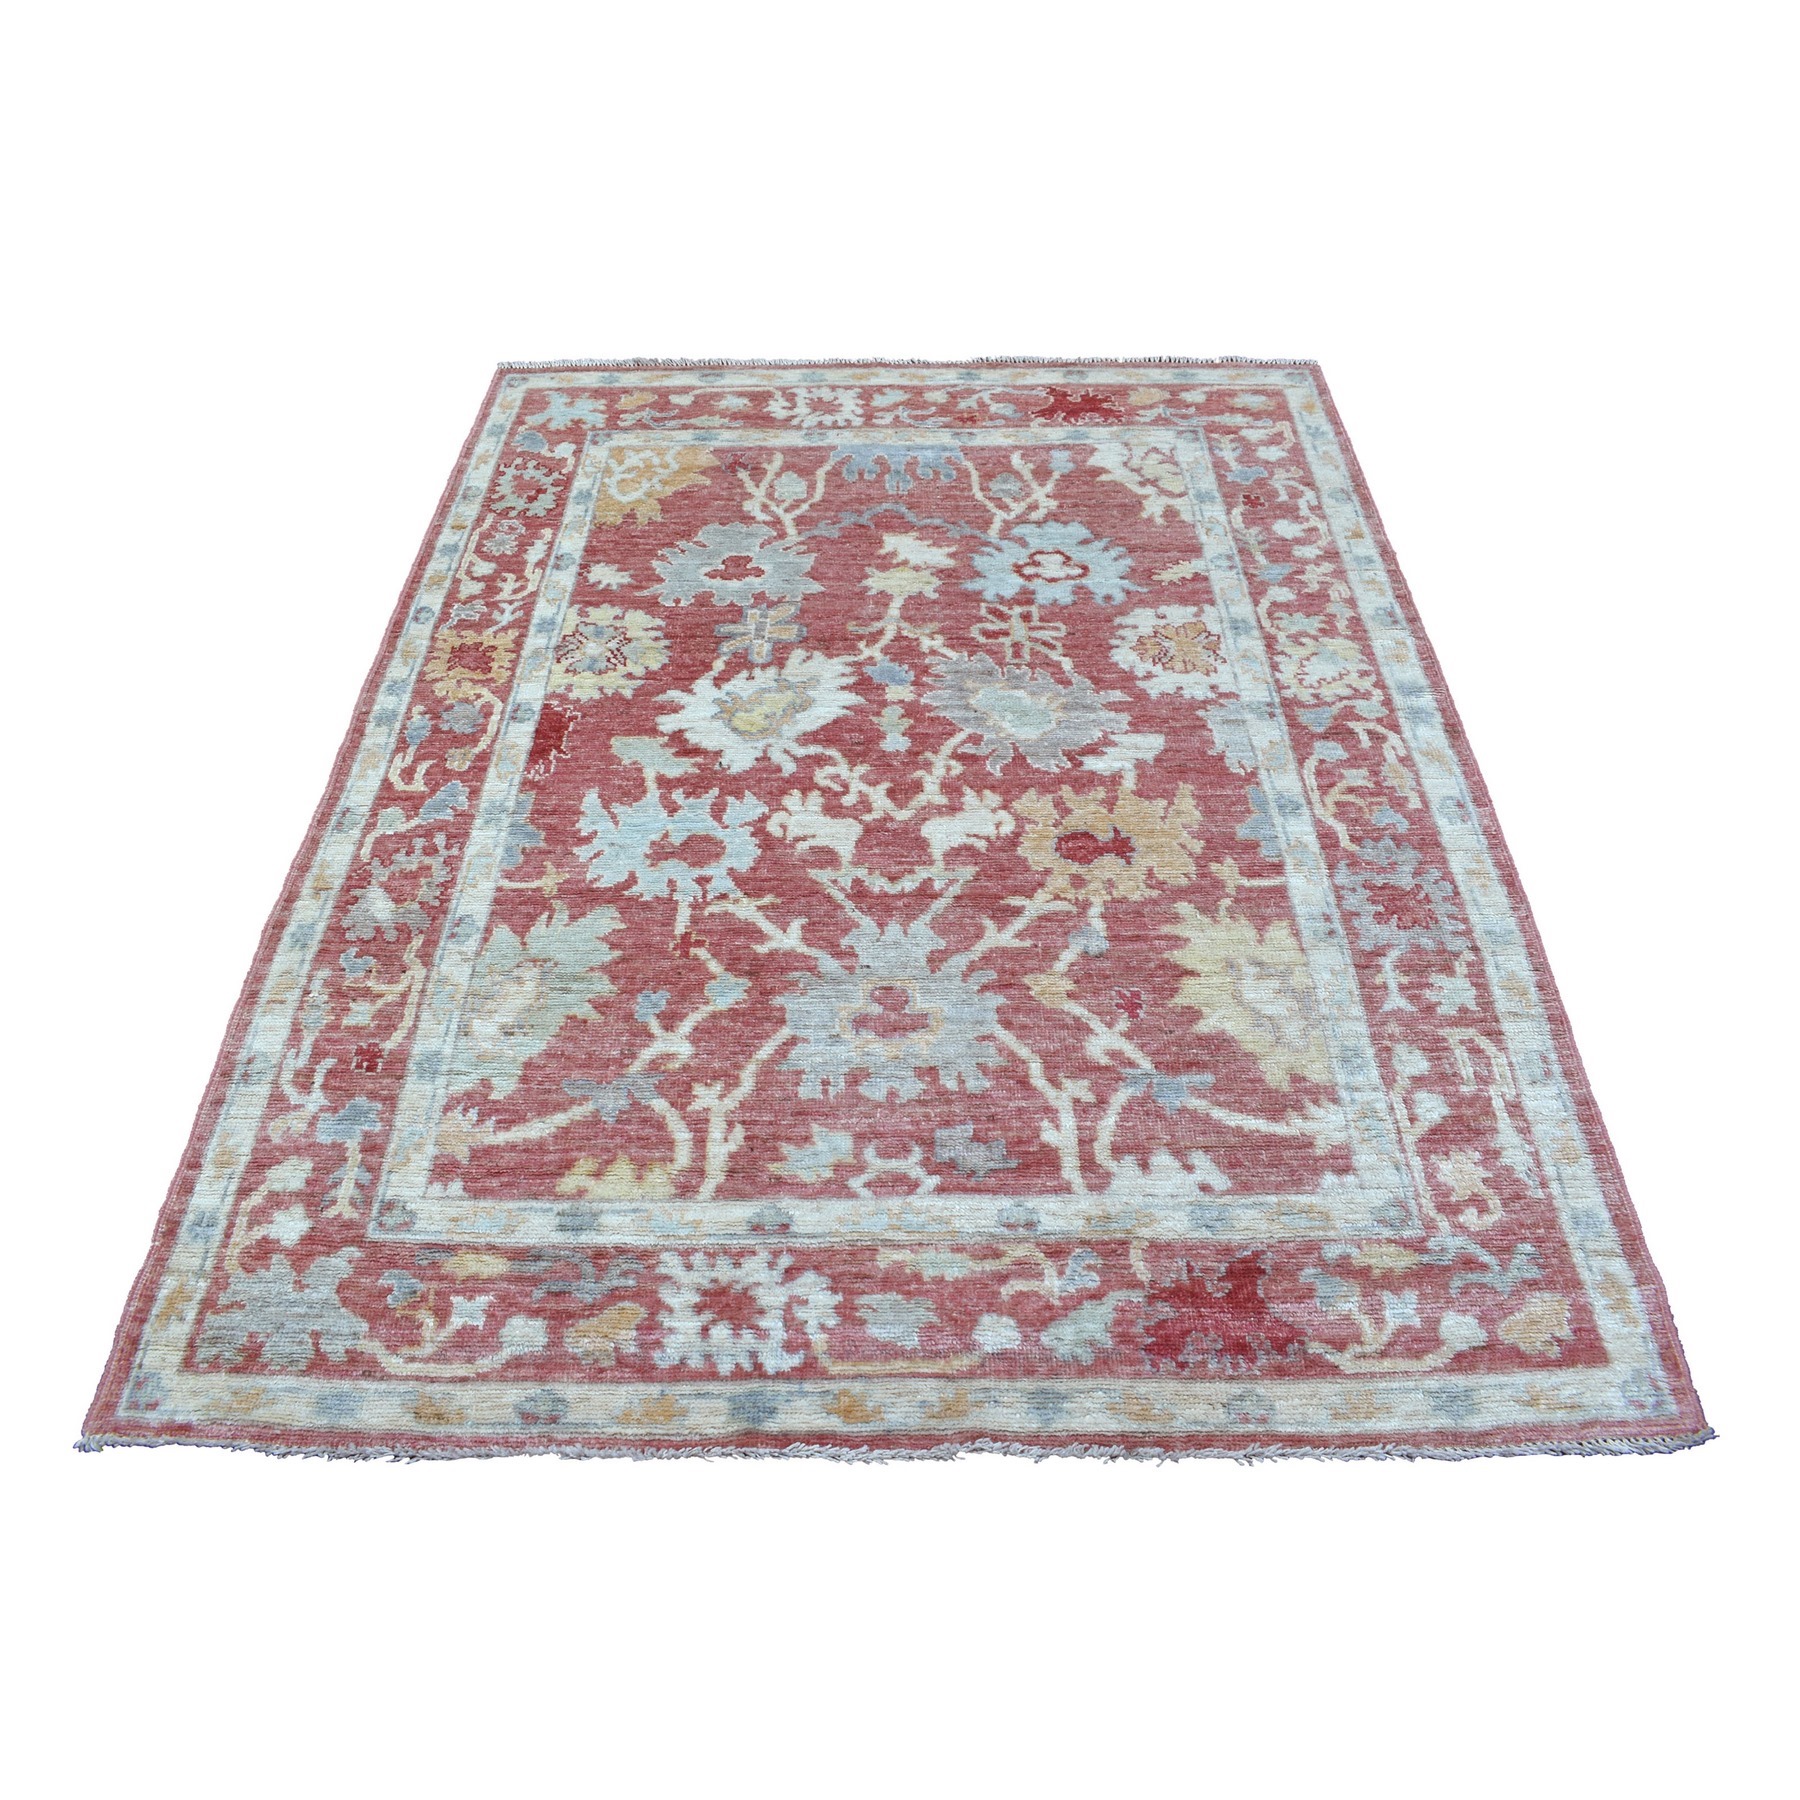 4'1"x6'7" Sun-Faded Red Angora Oushak with All Over Leaf Design Hand Woven Soft, Velvety Wool Oriental Rug 